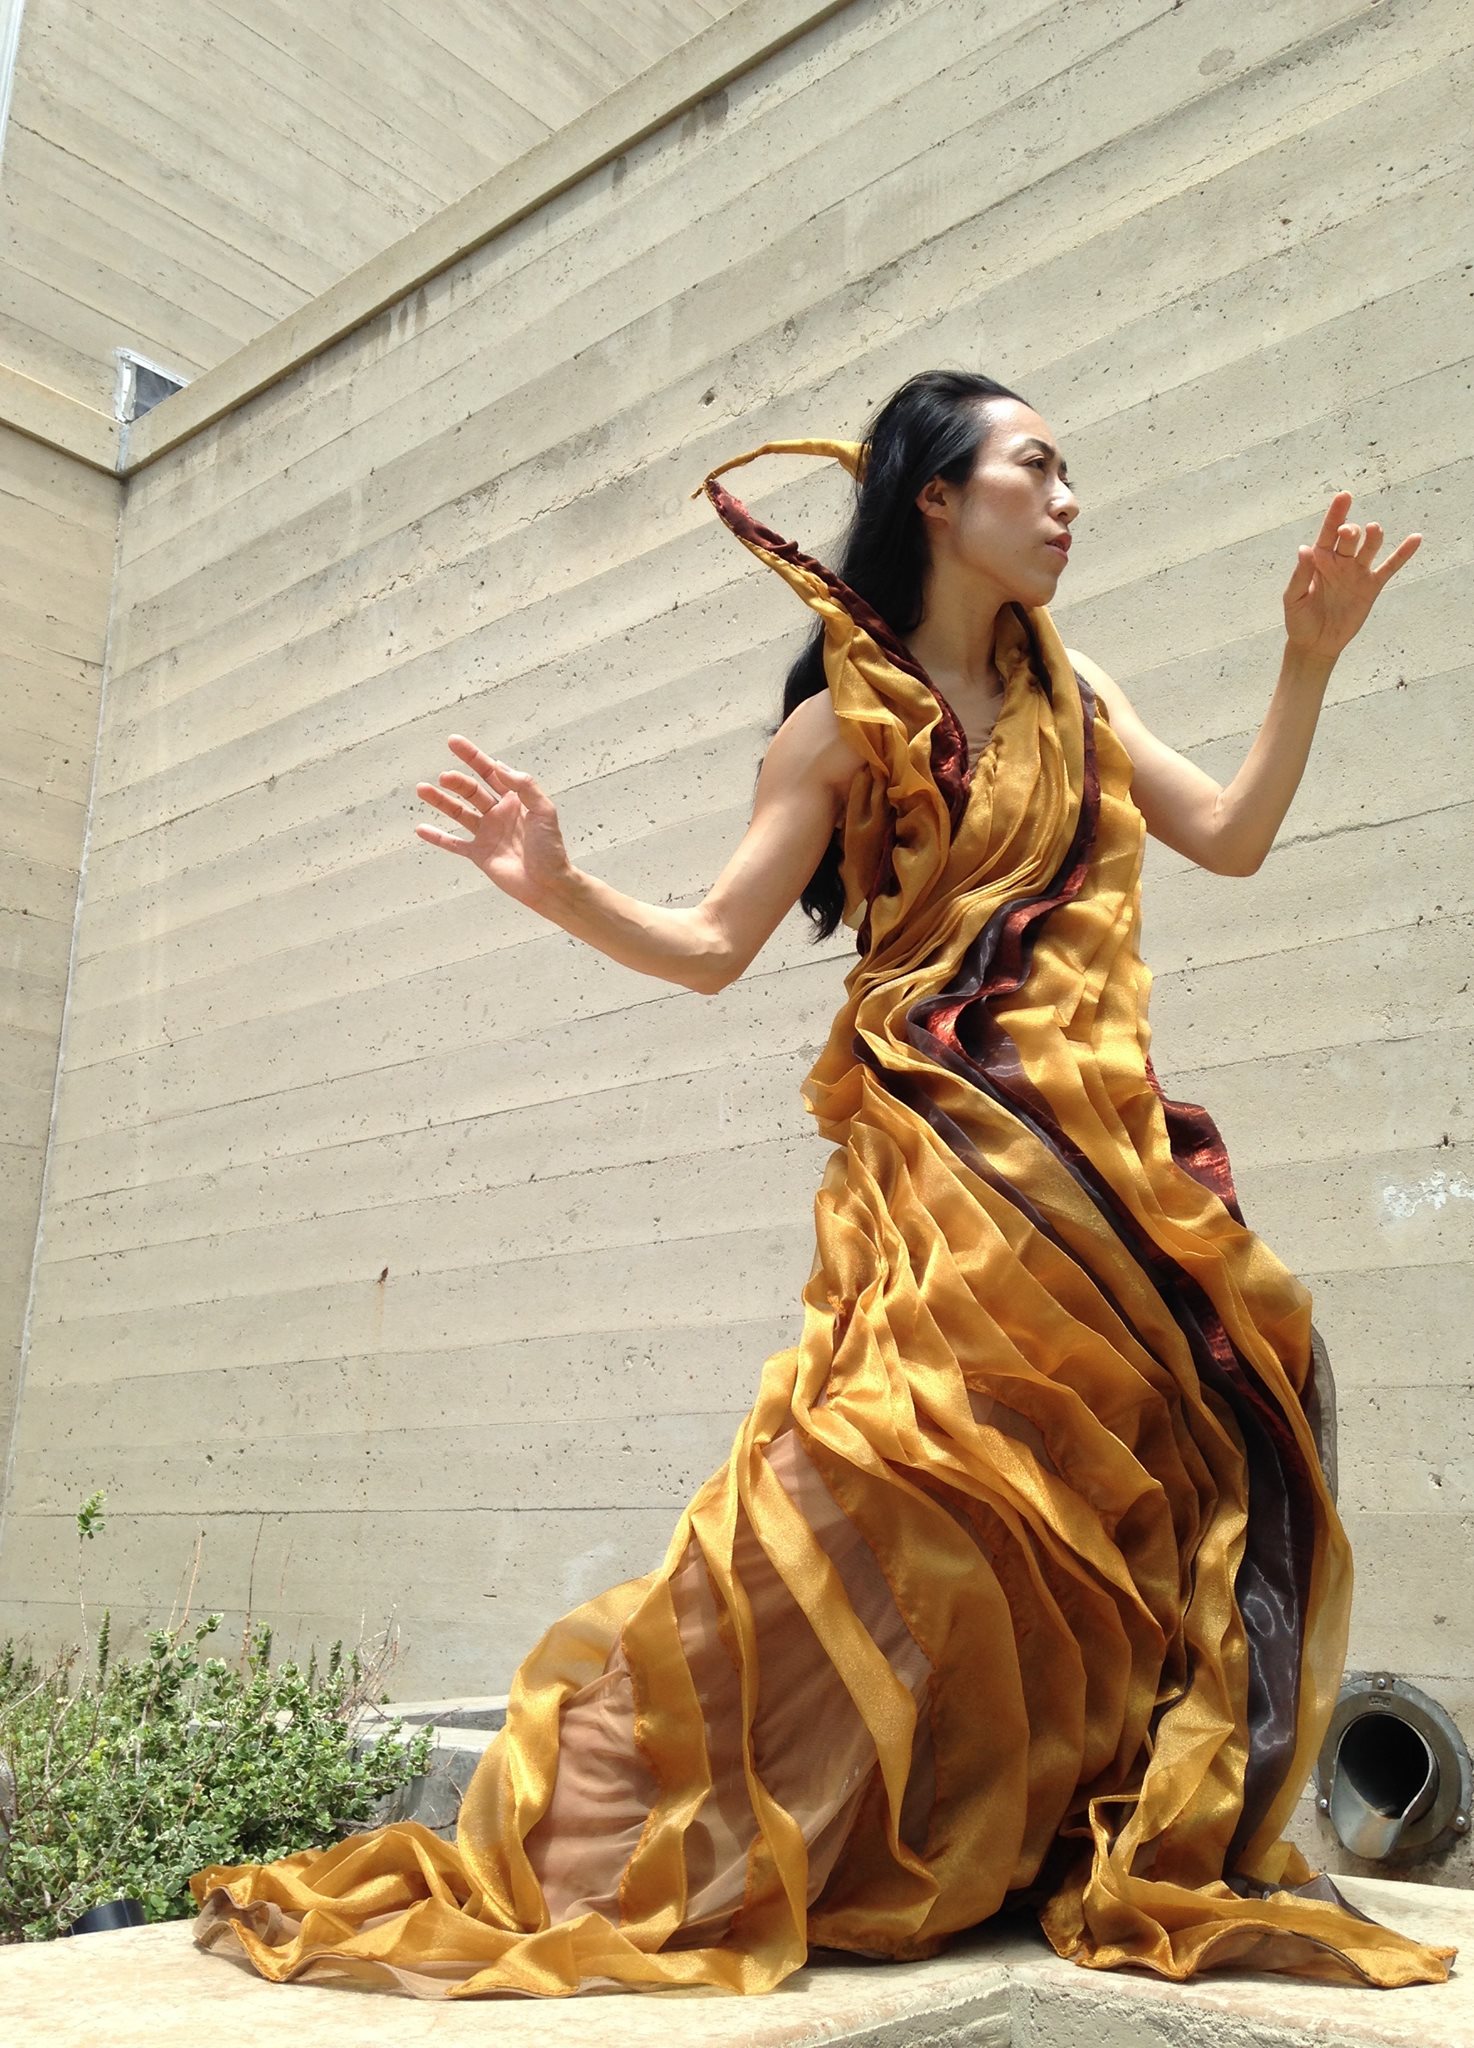 Aoi Koenig from Ormao Dance Company performs "Cedar" at the Colorado Springs Fine Arts Center. Costume by The Costume Lady.